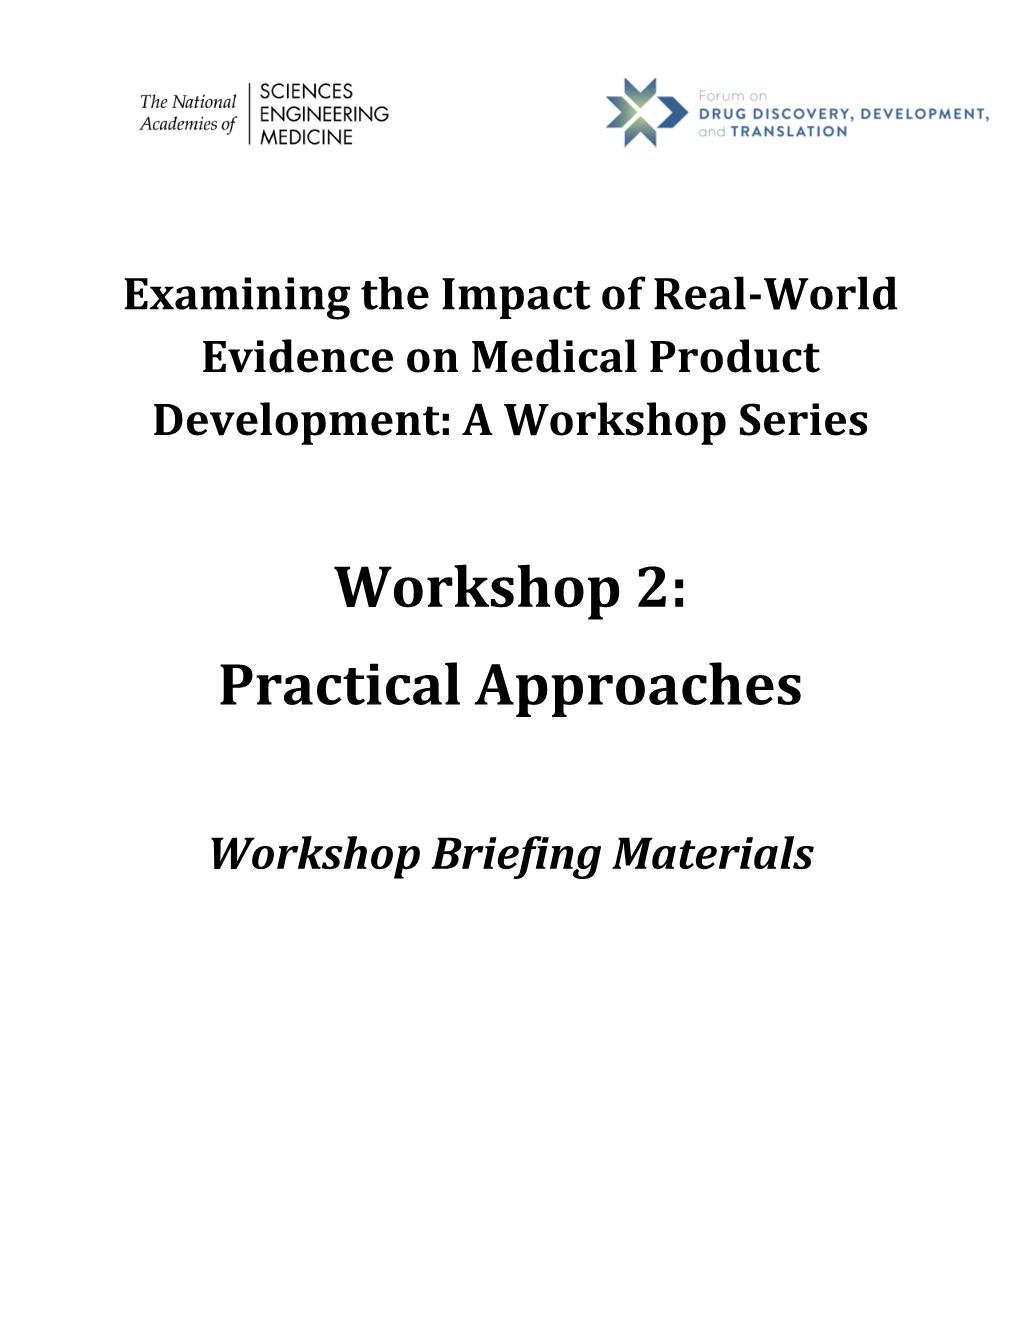 Workshop 2: Practical Approaches